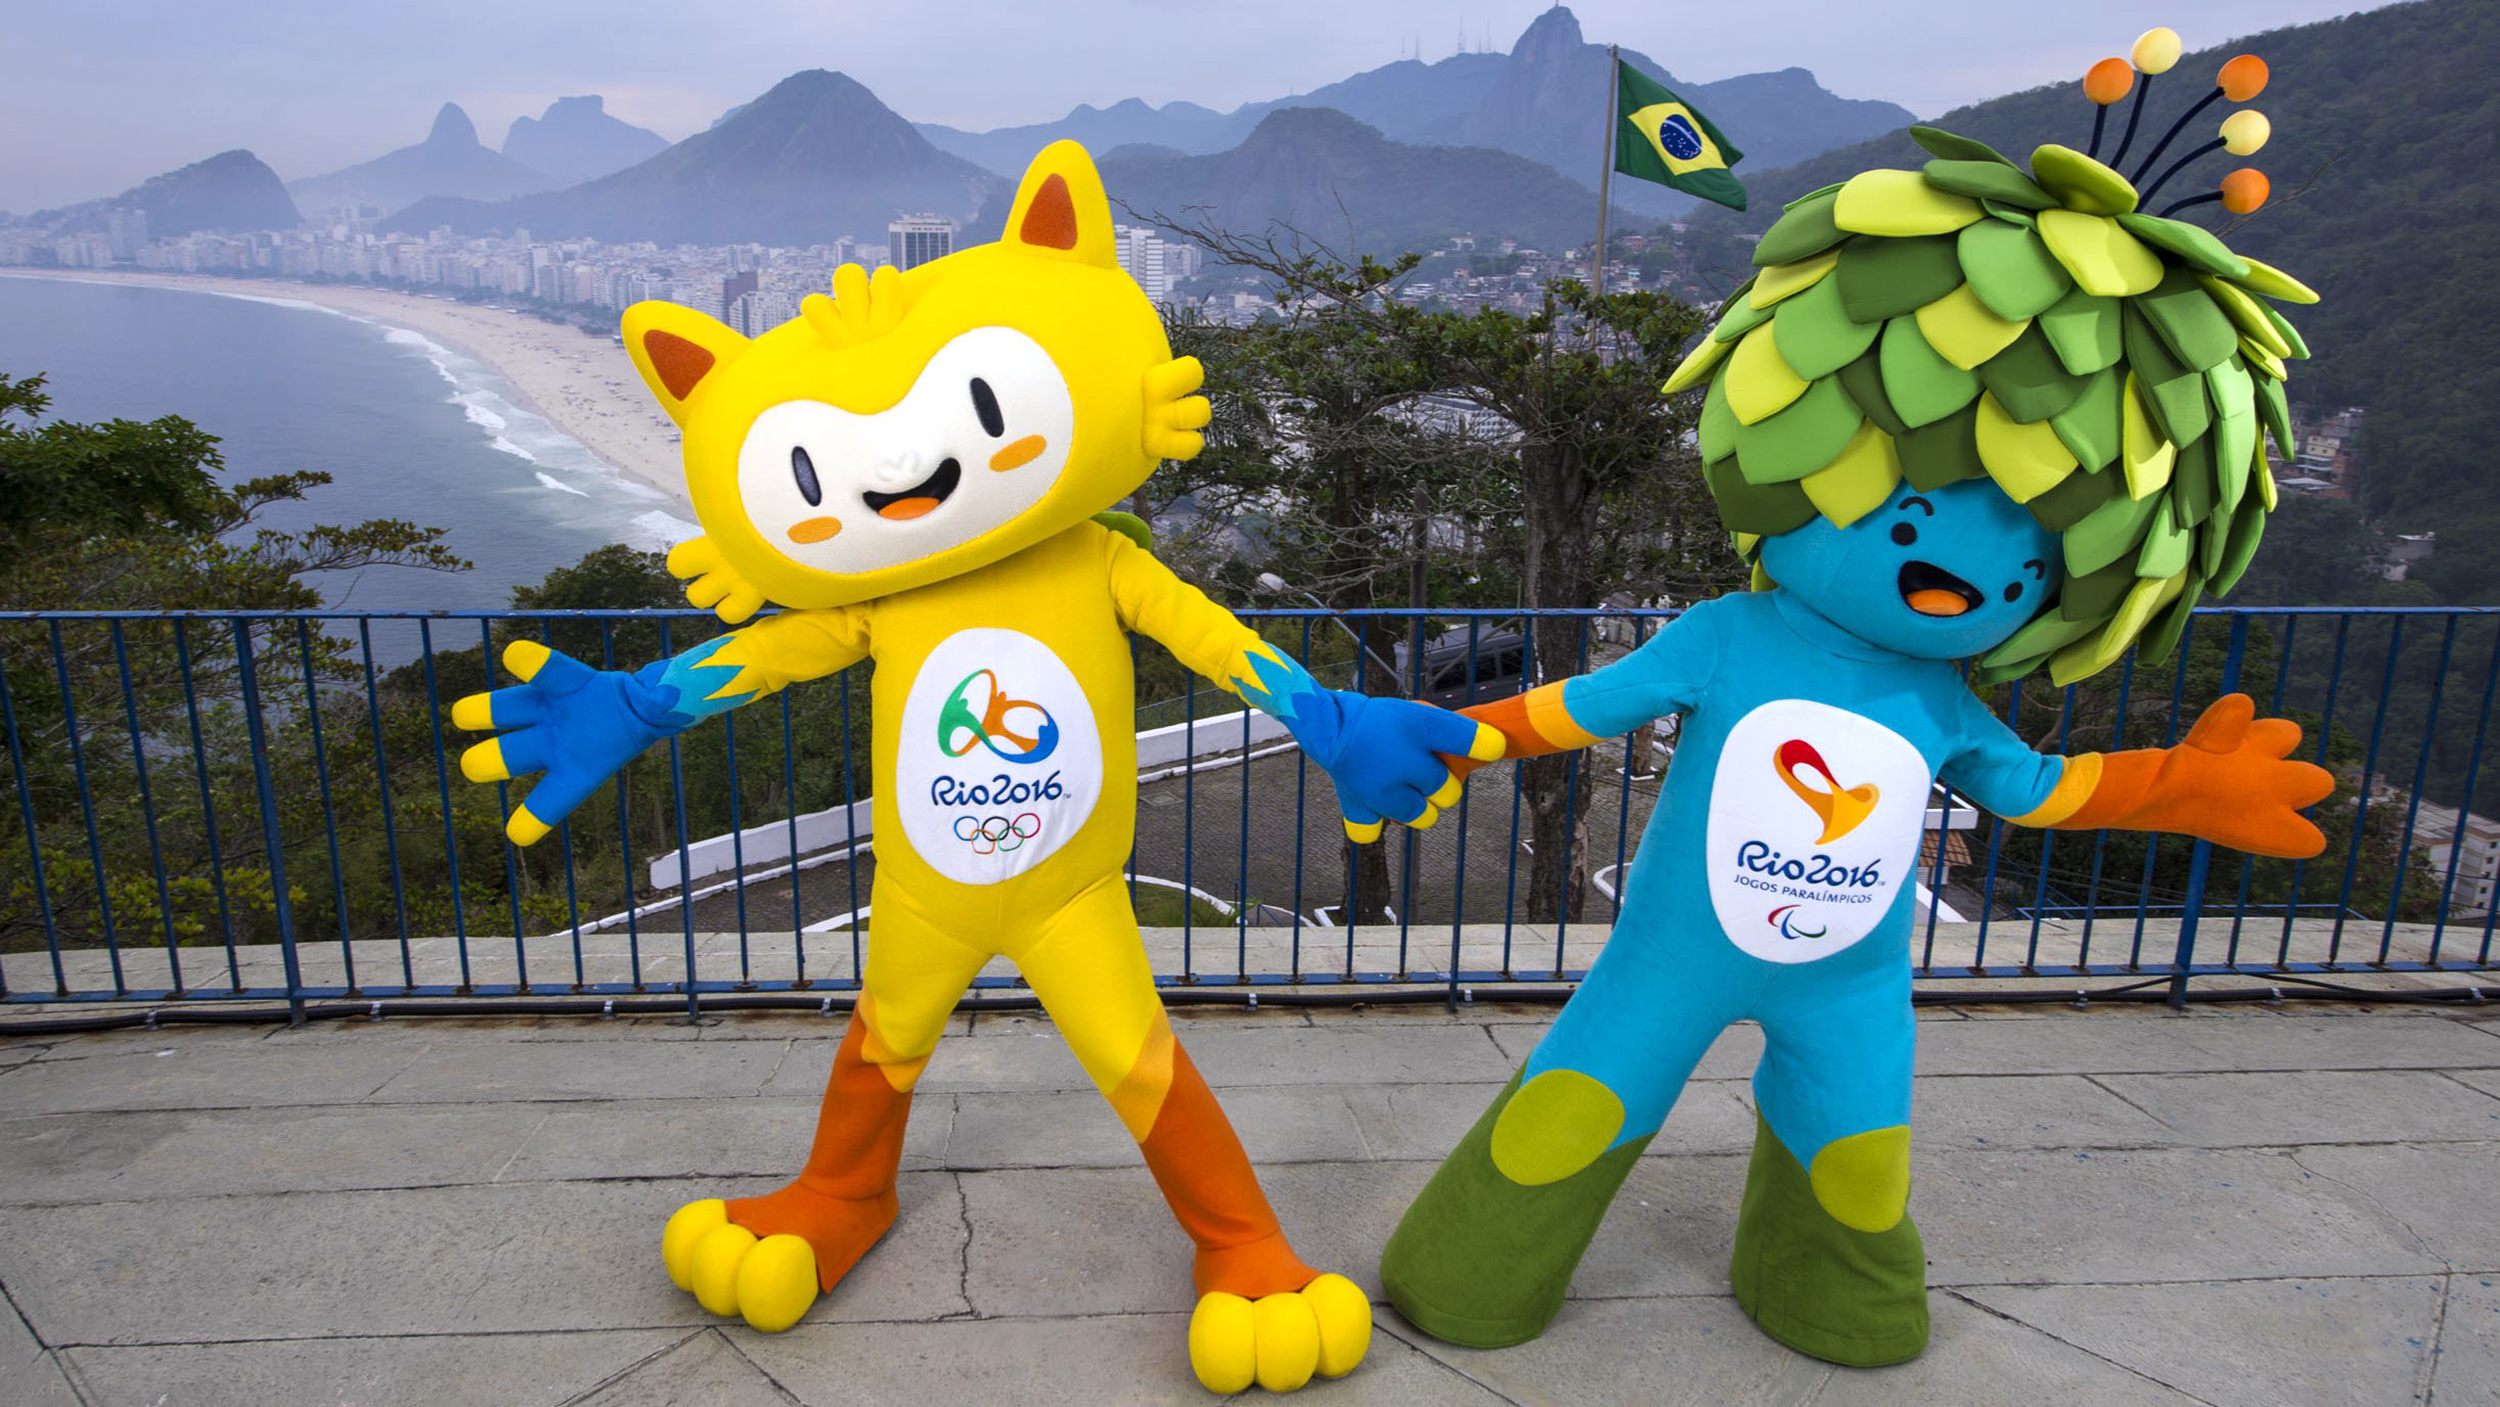 The unnamed mascots of the Rio 2016 Olympic and Paralympic Games are pictured with the Copacabana beach in the background during their first appearance in Rio de Janeiro, November 23, 2014, in this handout courtesy of the Brazil Olympic Committee (COB) These mascots of Rio 2016 Olympic and Paralympic Games are inspired by the Brazilian fauna and flora, and their names will be decided through a public vote, according to the COB. REUTERS/Alex Ferro/COB/Handout via Reuters (BRAZIL - Tags: SPORT OLYMPICS SOCIETY) ATTENTION EDITORS - THIS PICTURE WAS PROVIDED BY A THIRD PARTY. REUTERS IS UNABLE TO INDEPENDENTLY VERIFY THE AUTHENTICITY, CONTENT, LOCATION OR DATE OF THIS IMAGE. FOR EDITORIAL USE ONLY. NOT FOR SALE FOR MARKETING OR ADVERTISING CAMPAIGNS. THIS PICTURE IS DISTRIBUTED EXACTLY AS RECEIVED BY REUTERS, AS A SERVICE TO CLIENTS